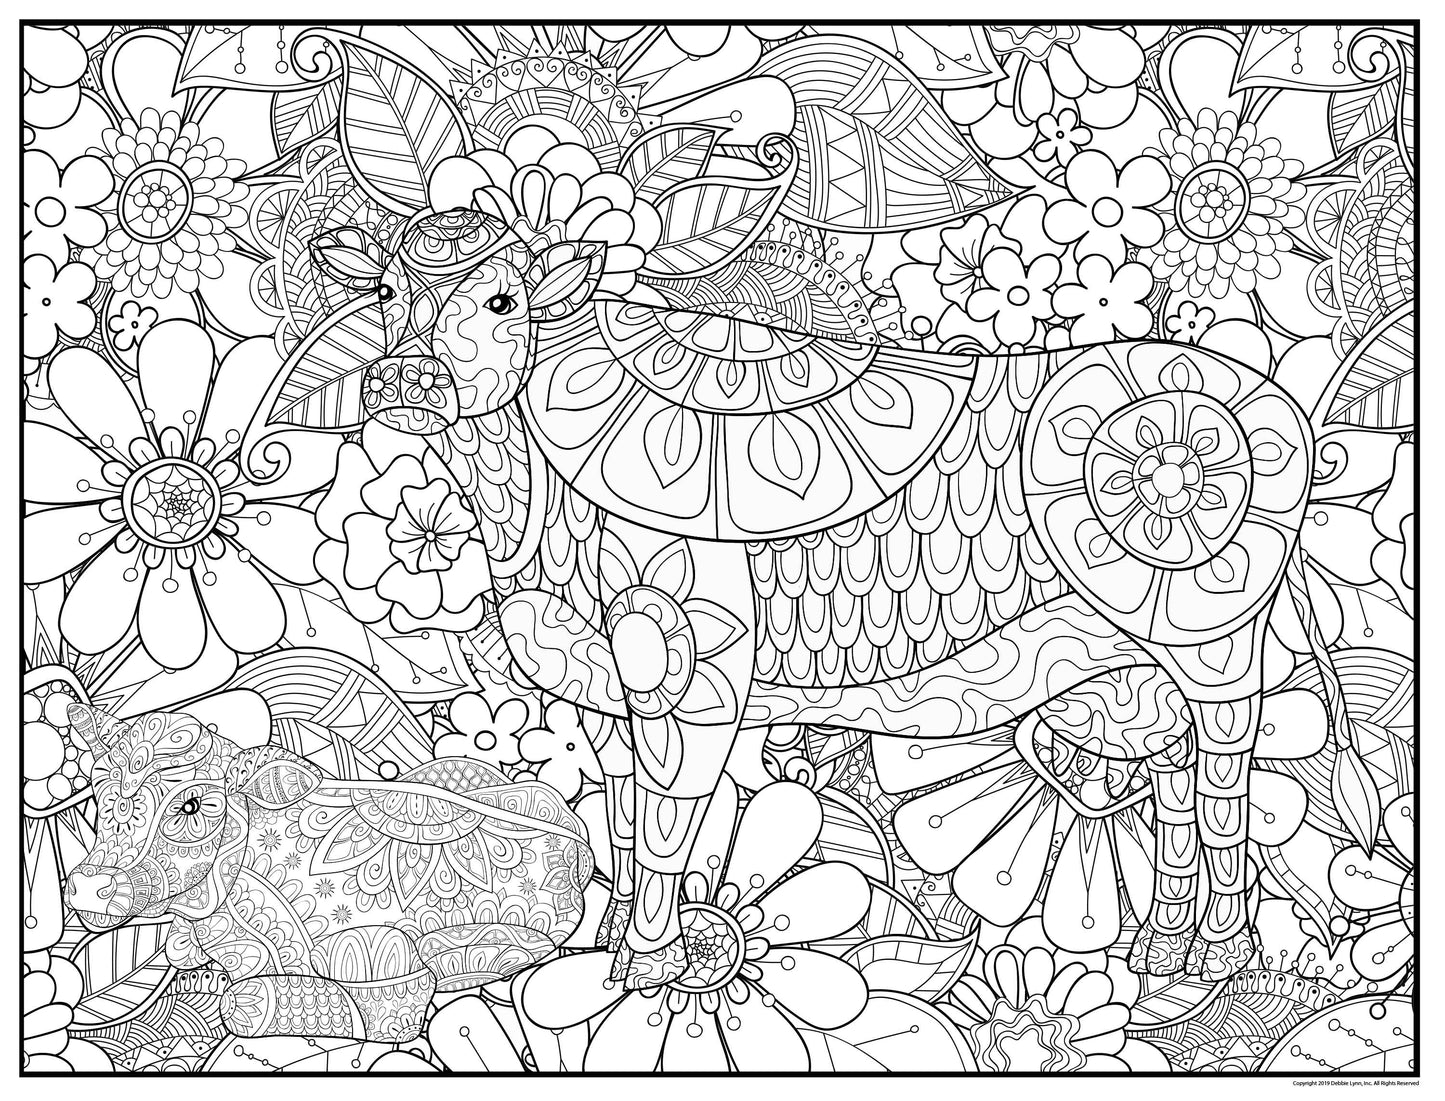 Cows Personalized Giant Coloring Poster 46"x60"